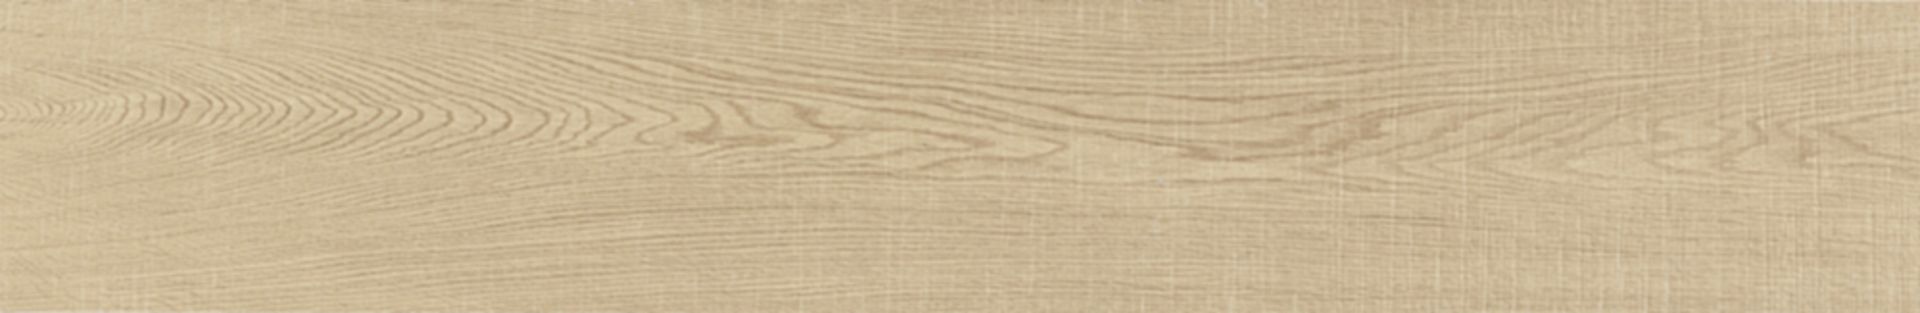 NEW 9.56m2 LAMINATE FLOORING TREND NATURE OAK. With a warm natural tone and a complex grain - Image 3 of 3